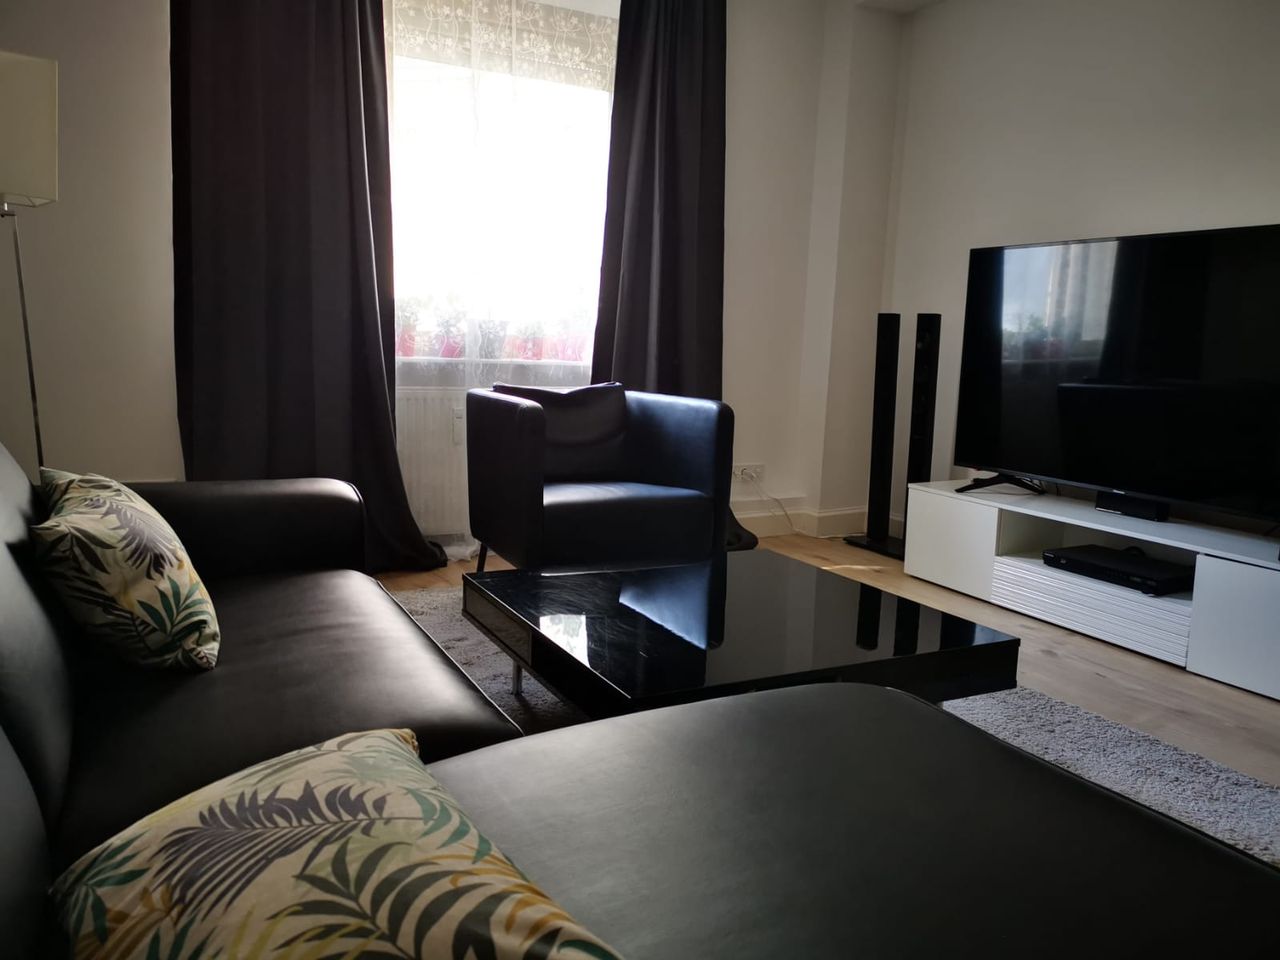 Lovely Chic flat located in Charlottenburg